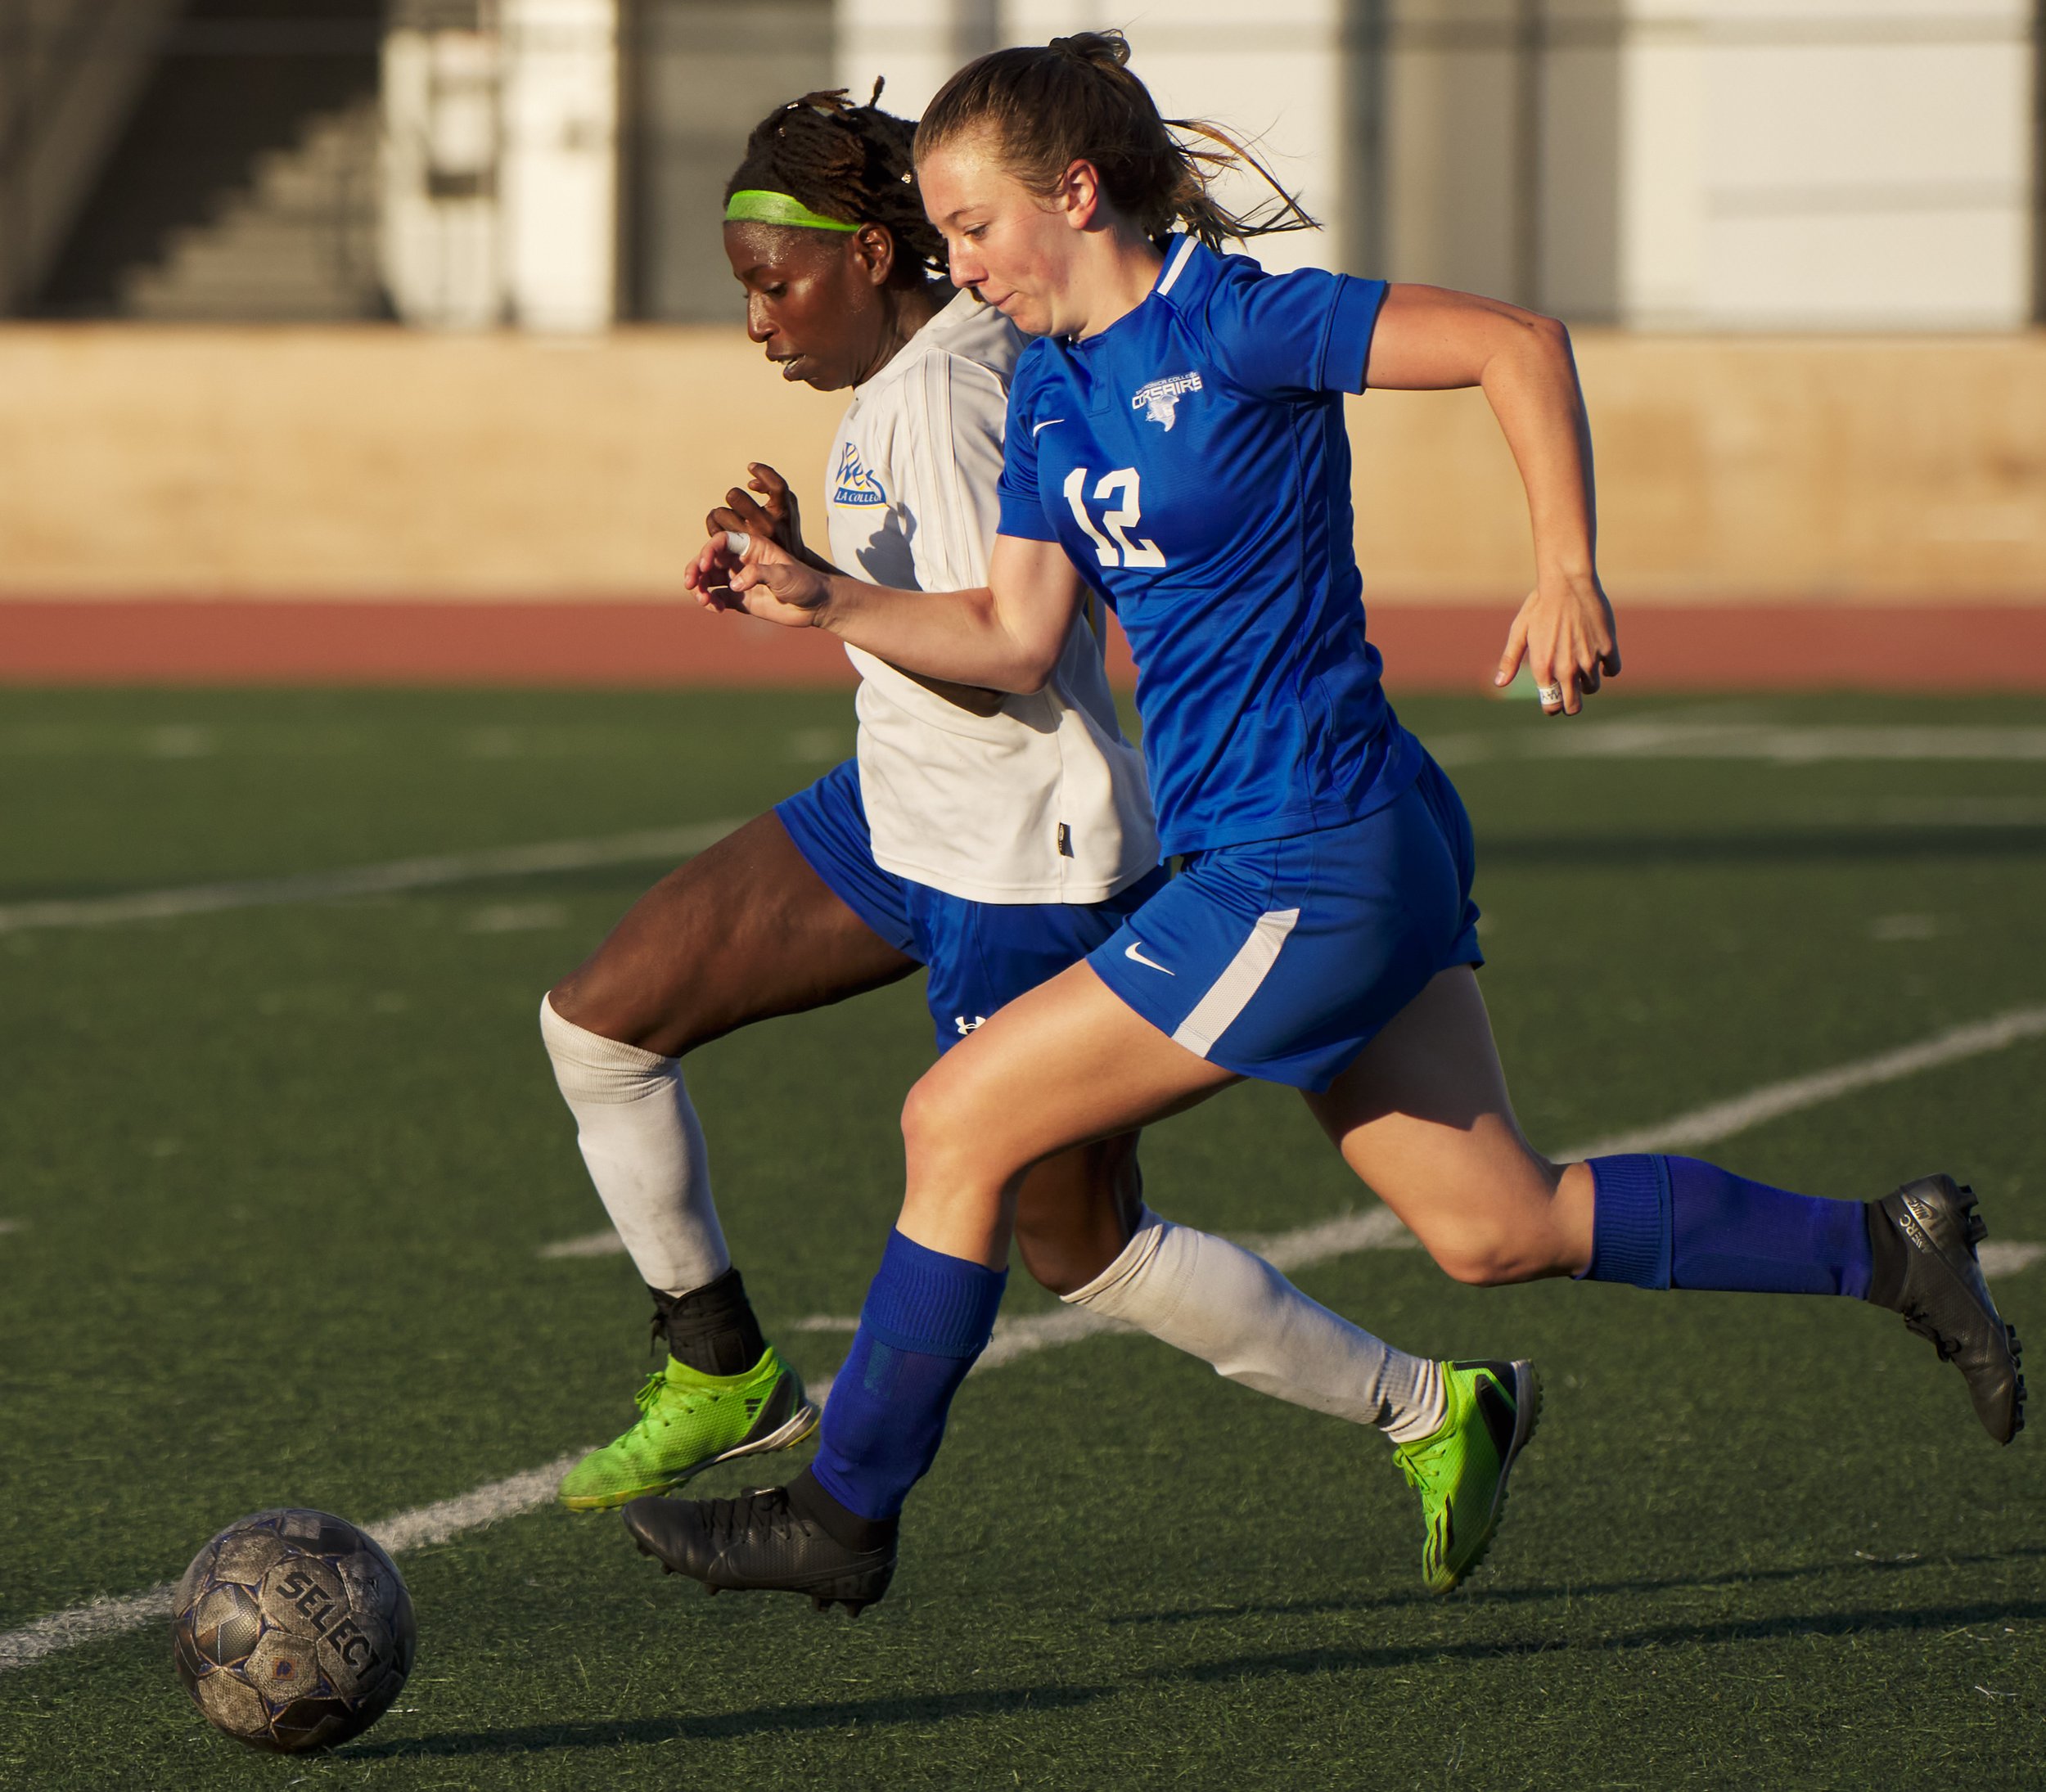  West Los Angeles College Wildcats' Leslie Walker and Santa Monica College Corsairs' Eden Hotch during the women's soccer match on Friday, Sept. 30, 2022, at Corsair Field in Santa Monica, Calif. The Corsairs won 3-2. (Nicholas McCall | The Corsair) 